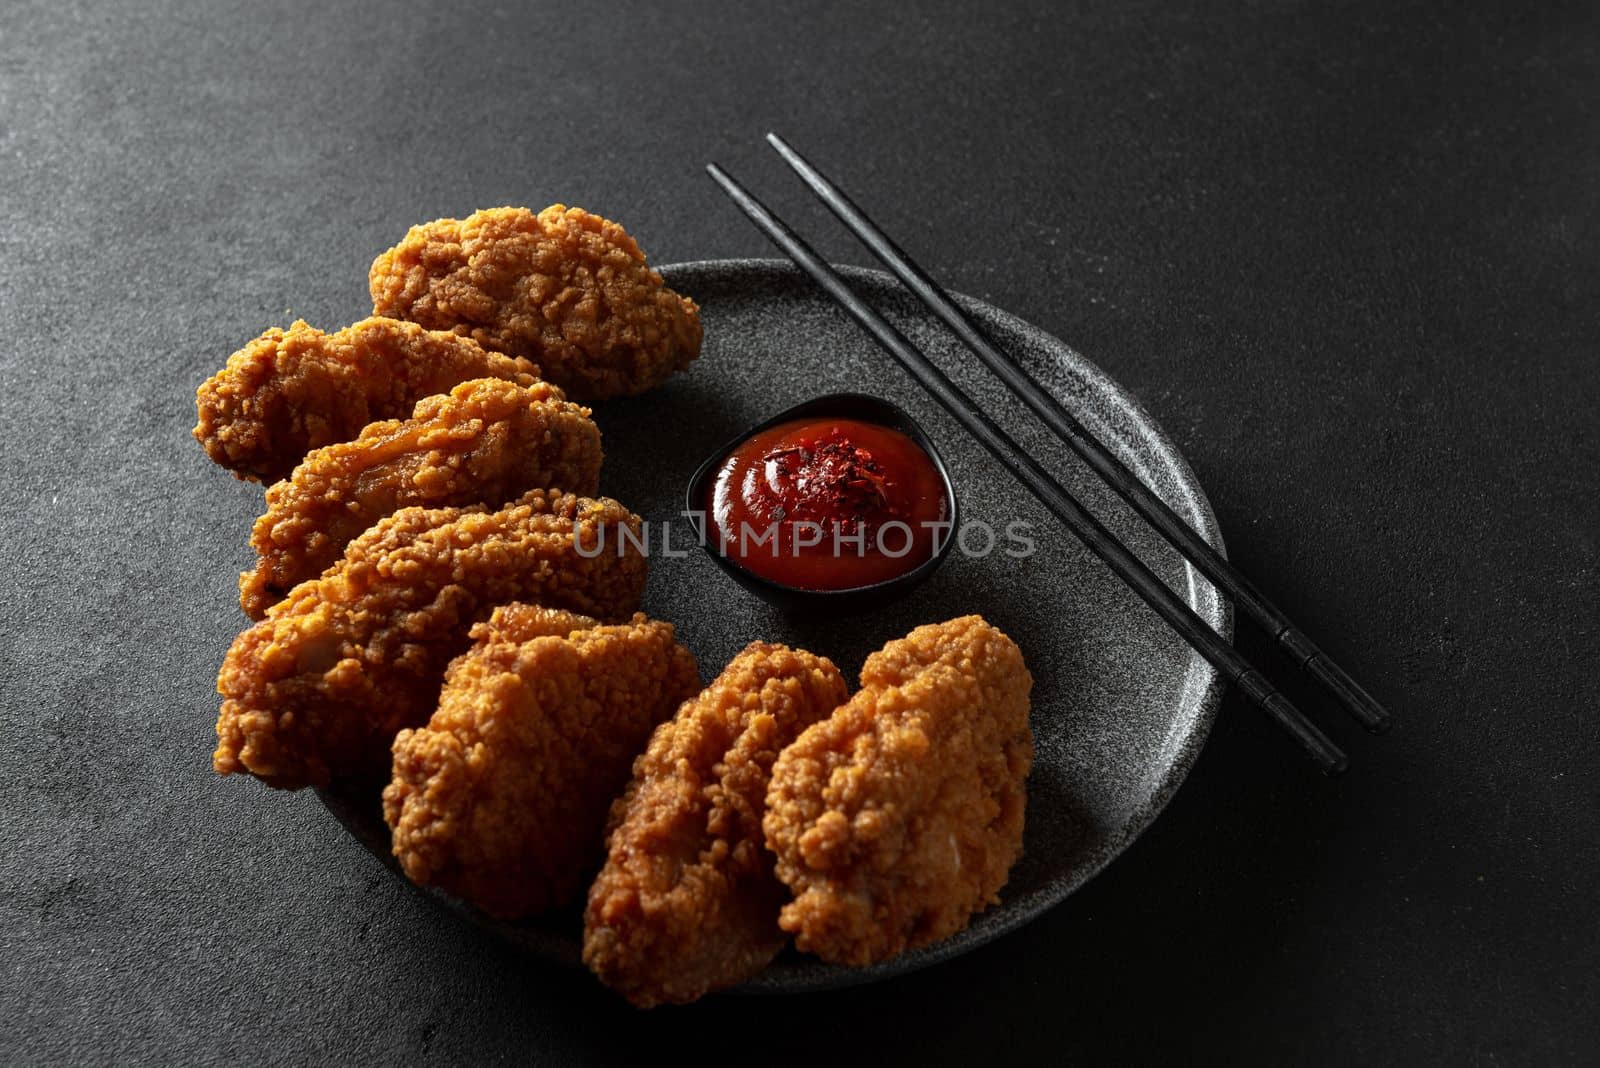 Spicy pieces of chicken fillet in crispy breading, on a black plate on a dark background, stone or concrete. Top view with a copying spot. by gulyaevstudio